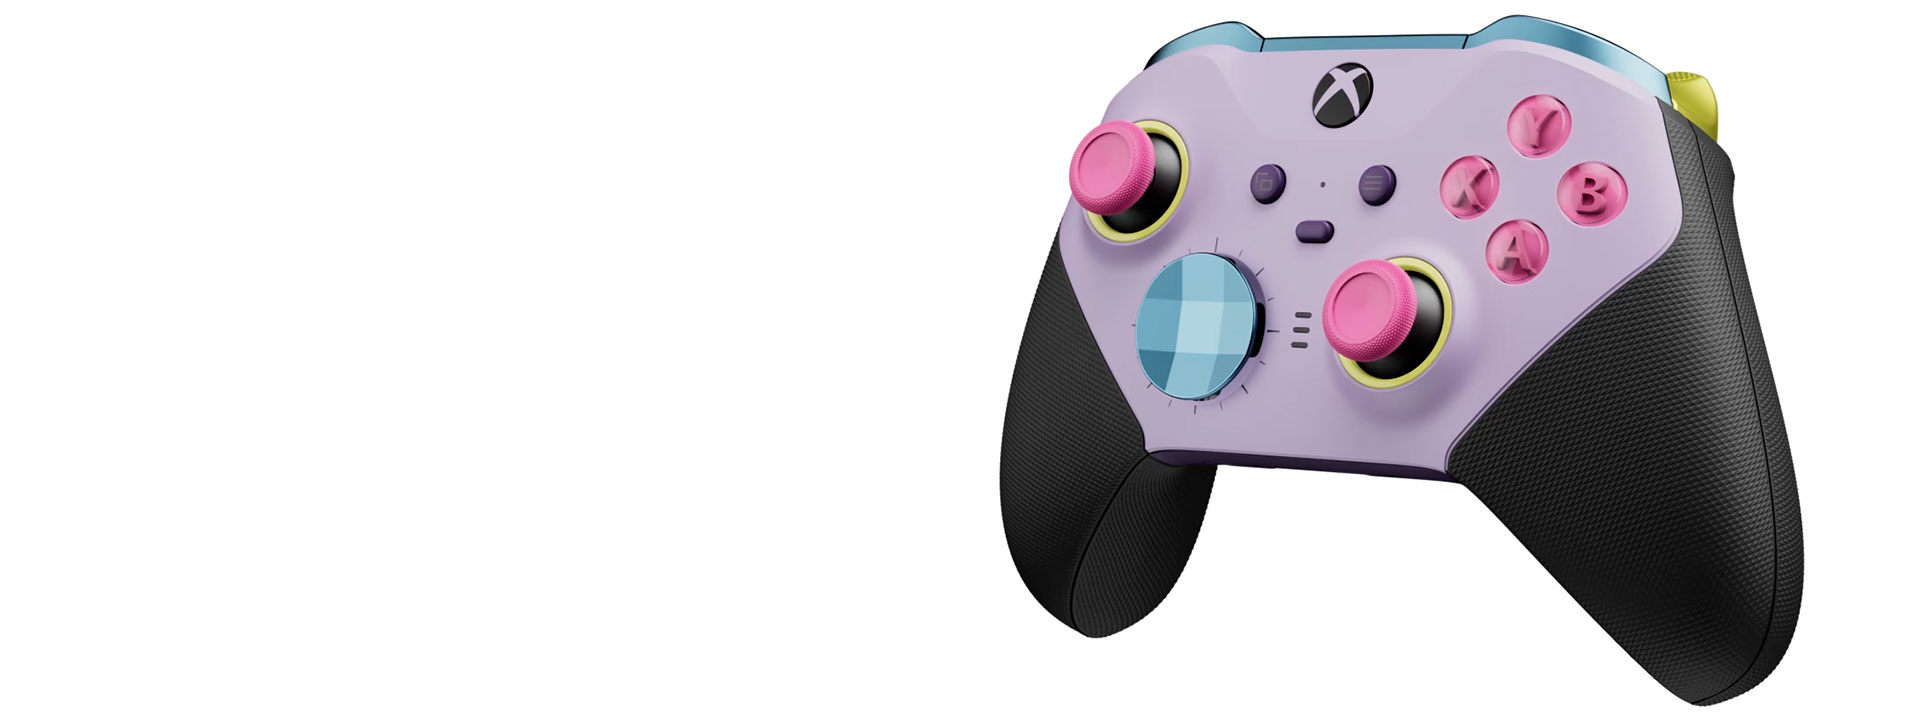 Xbox elite series 2 controller with customized colors using XDL